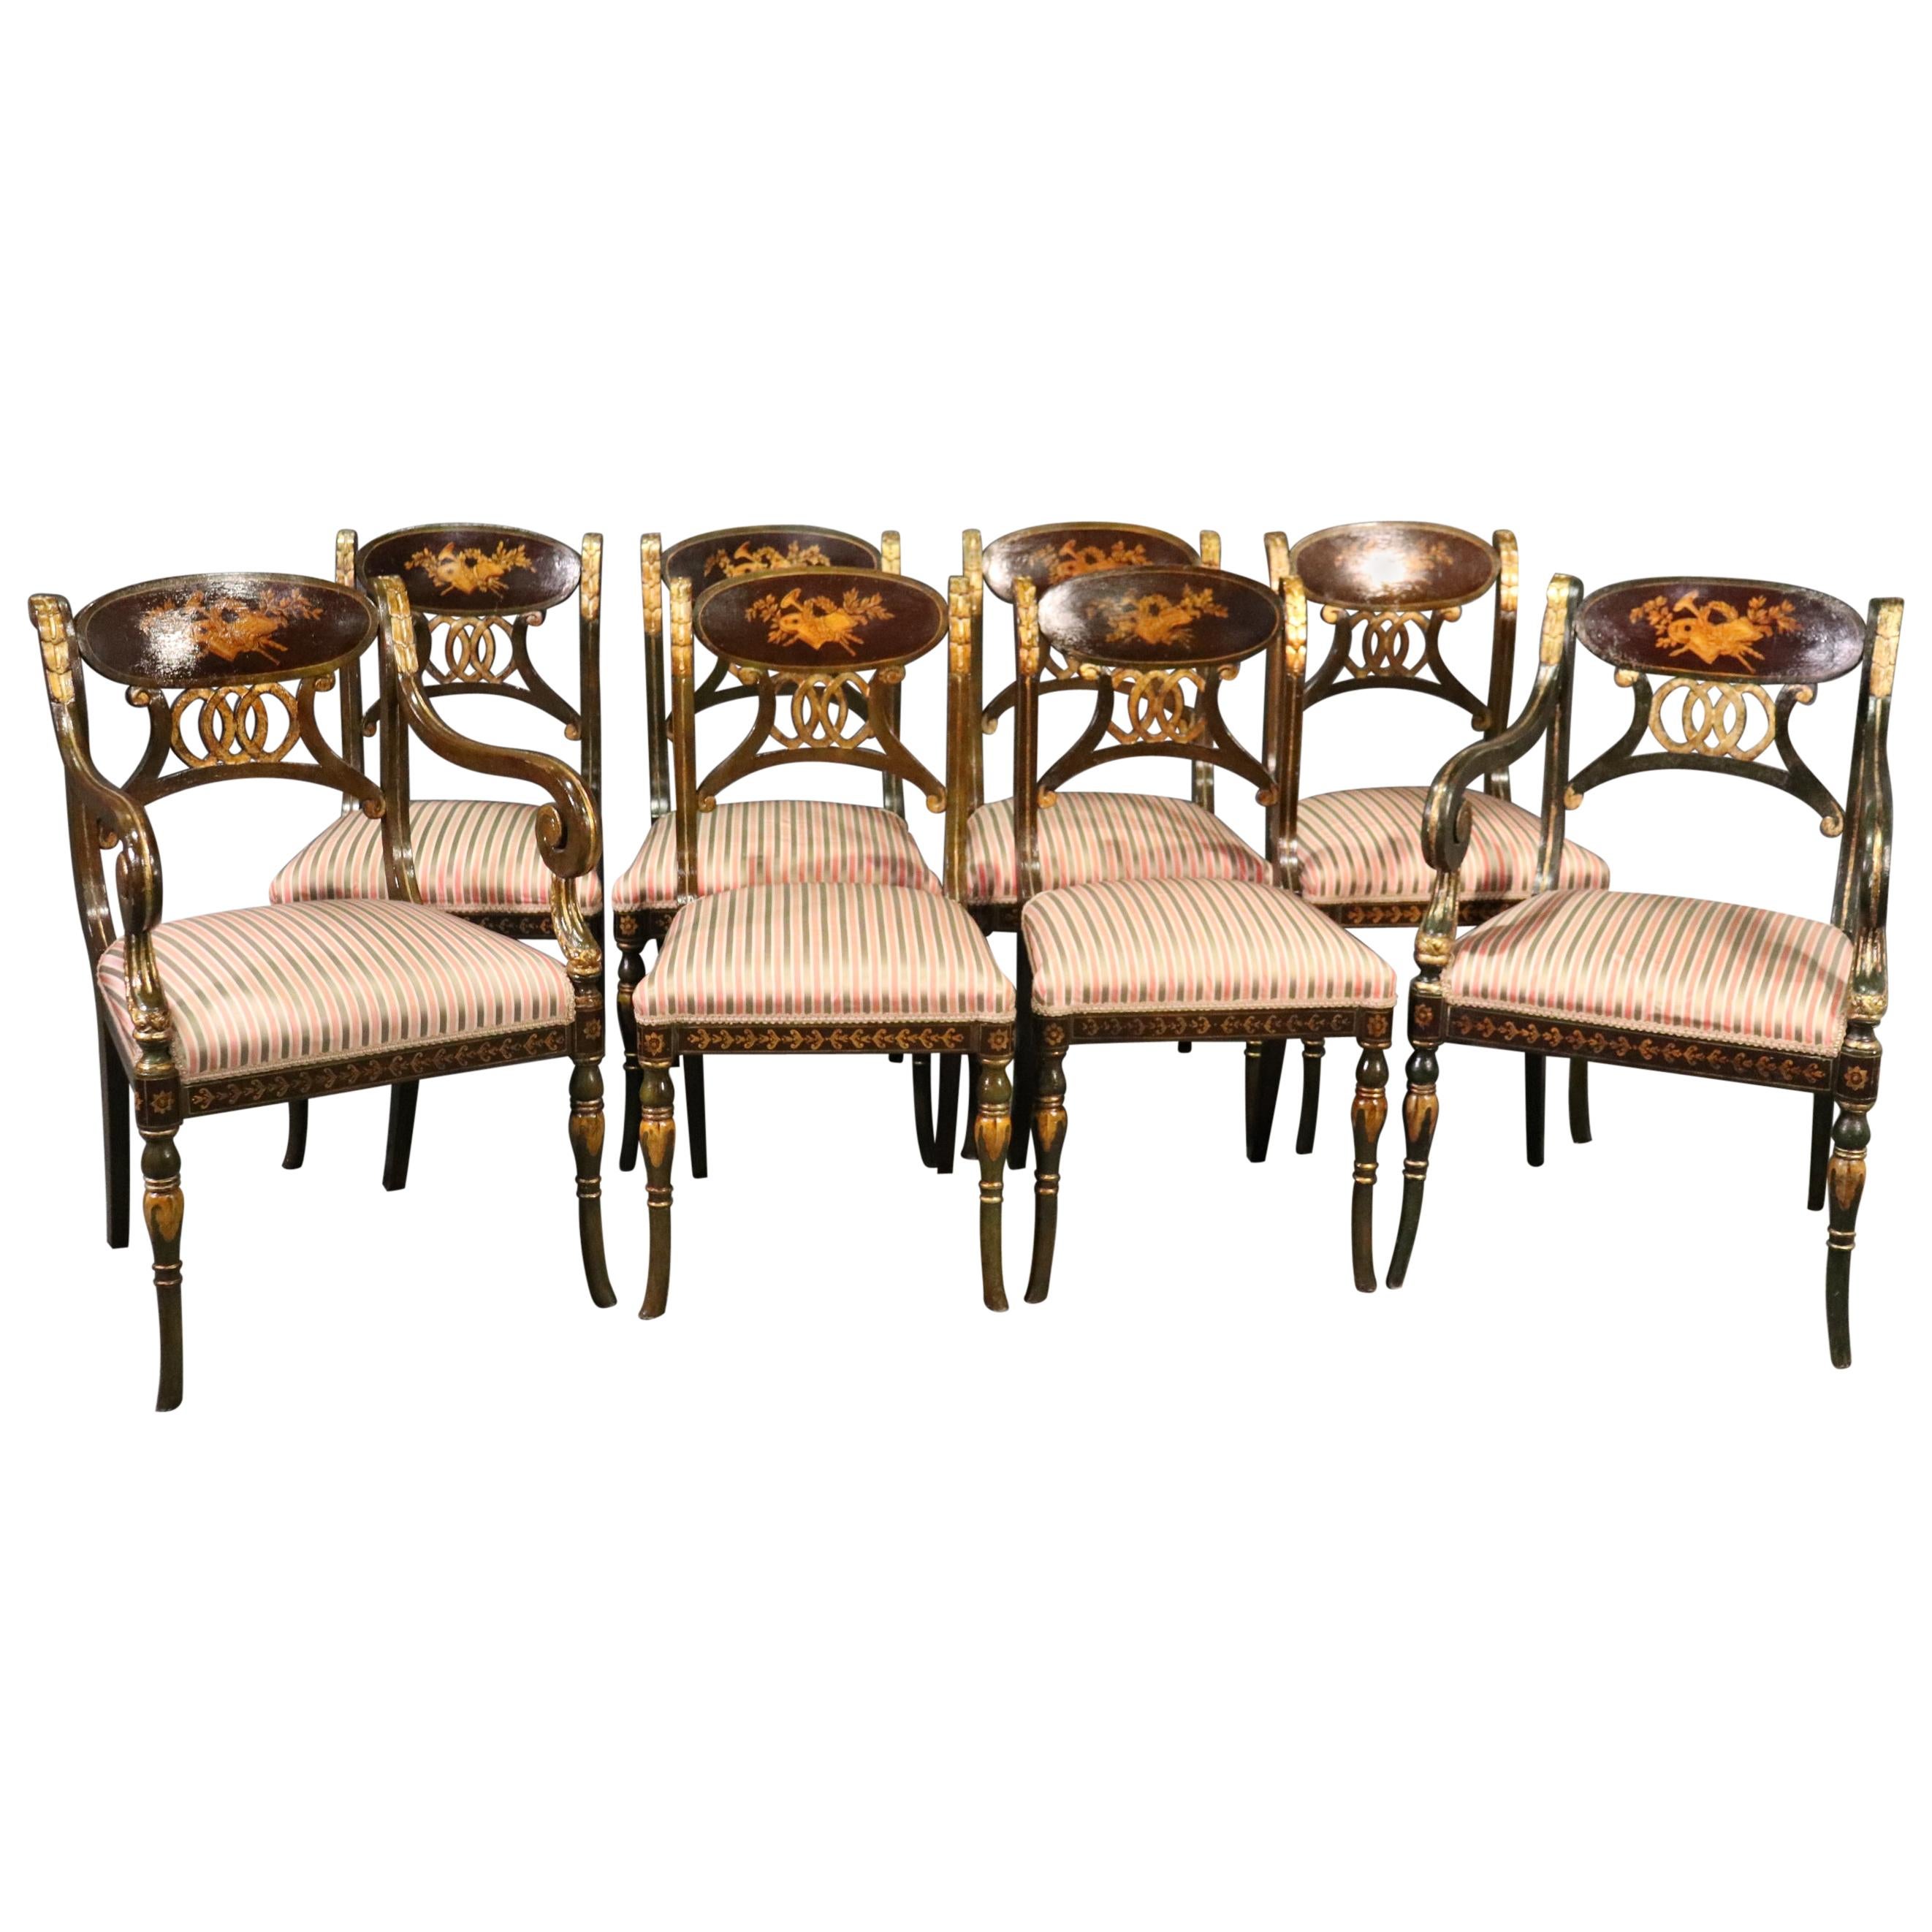 Set 8 Painted and Gilded Regency Style Dining Chairs with Musical Instruments 